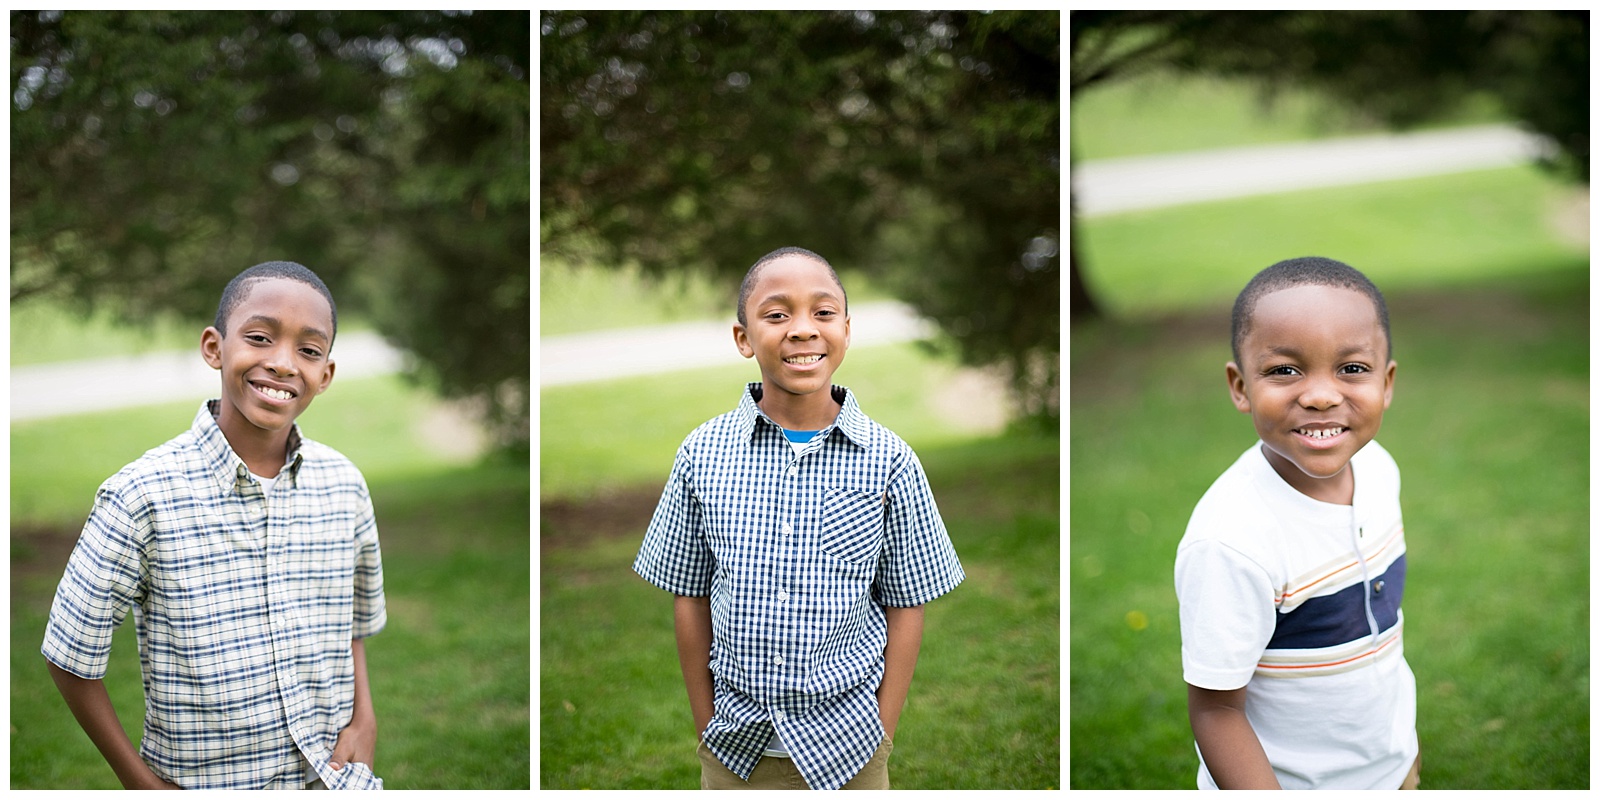 Outdoor Family Pictures | Monica Brown Photography | monicabrownphoto.com